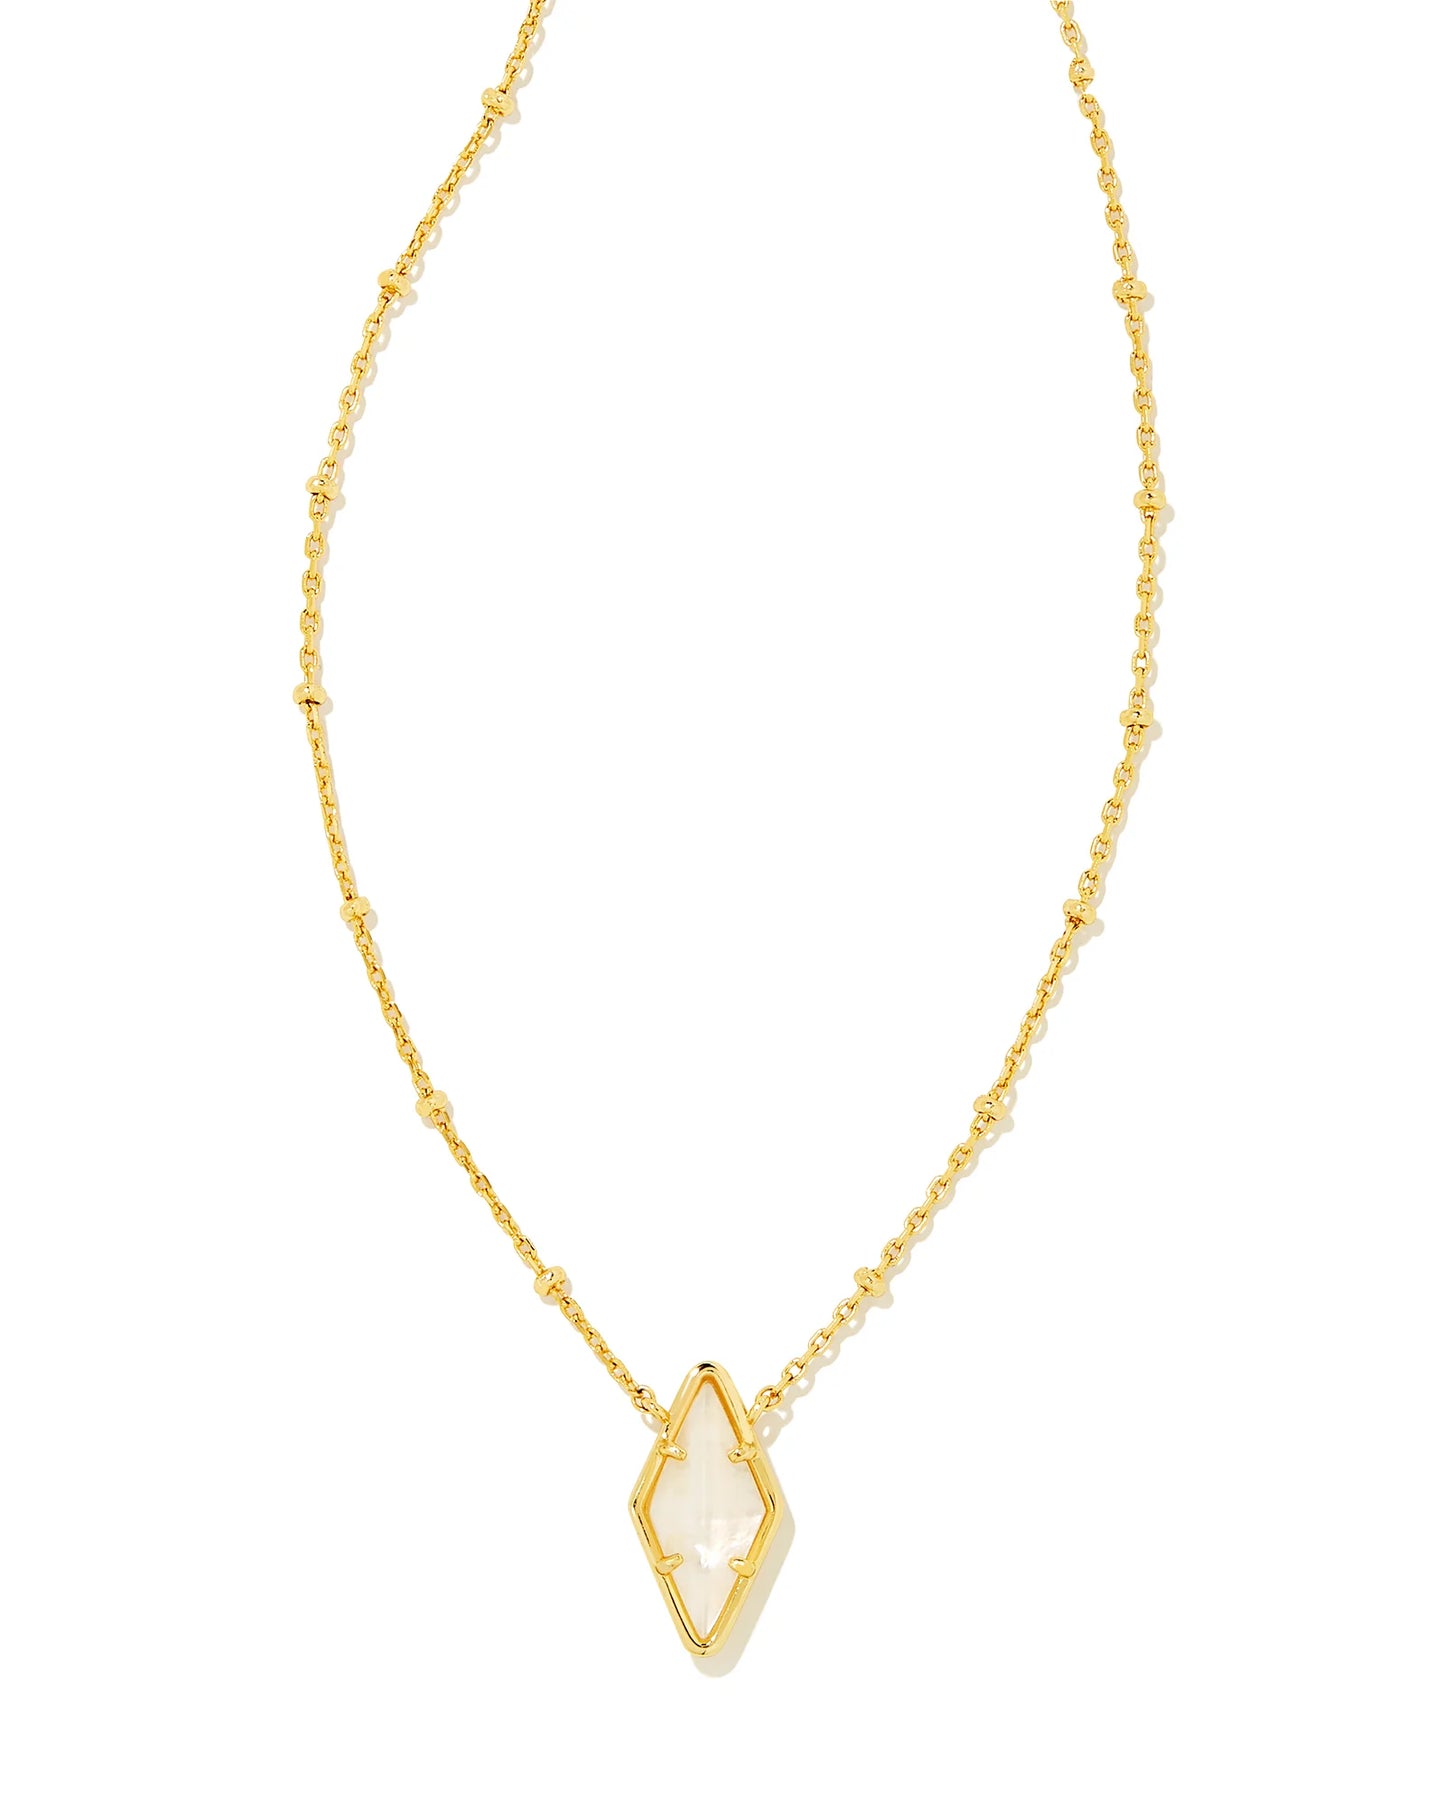 Kendra Scott Kinsley Short Pendant Necklace Gold Ivory Mother of Pearl-Necklaces-Kendra Scott-N00329GLD-The Twisted Chandelier